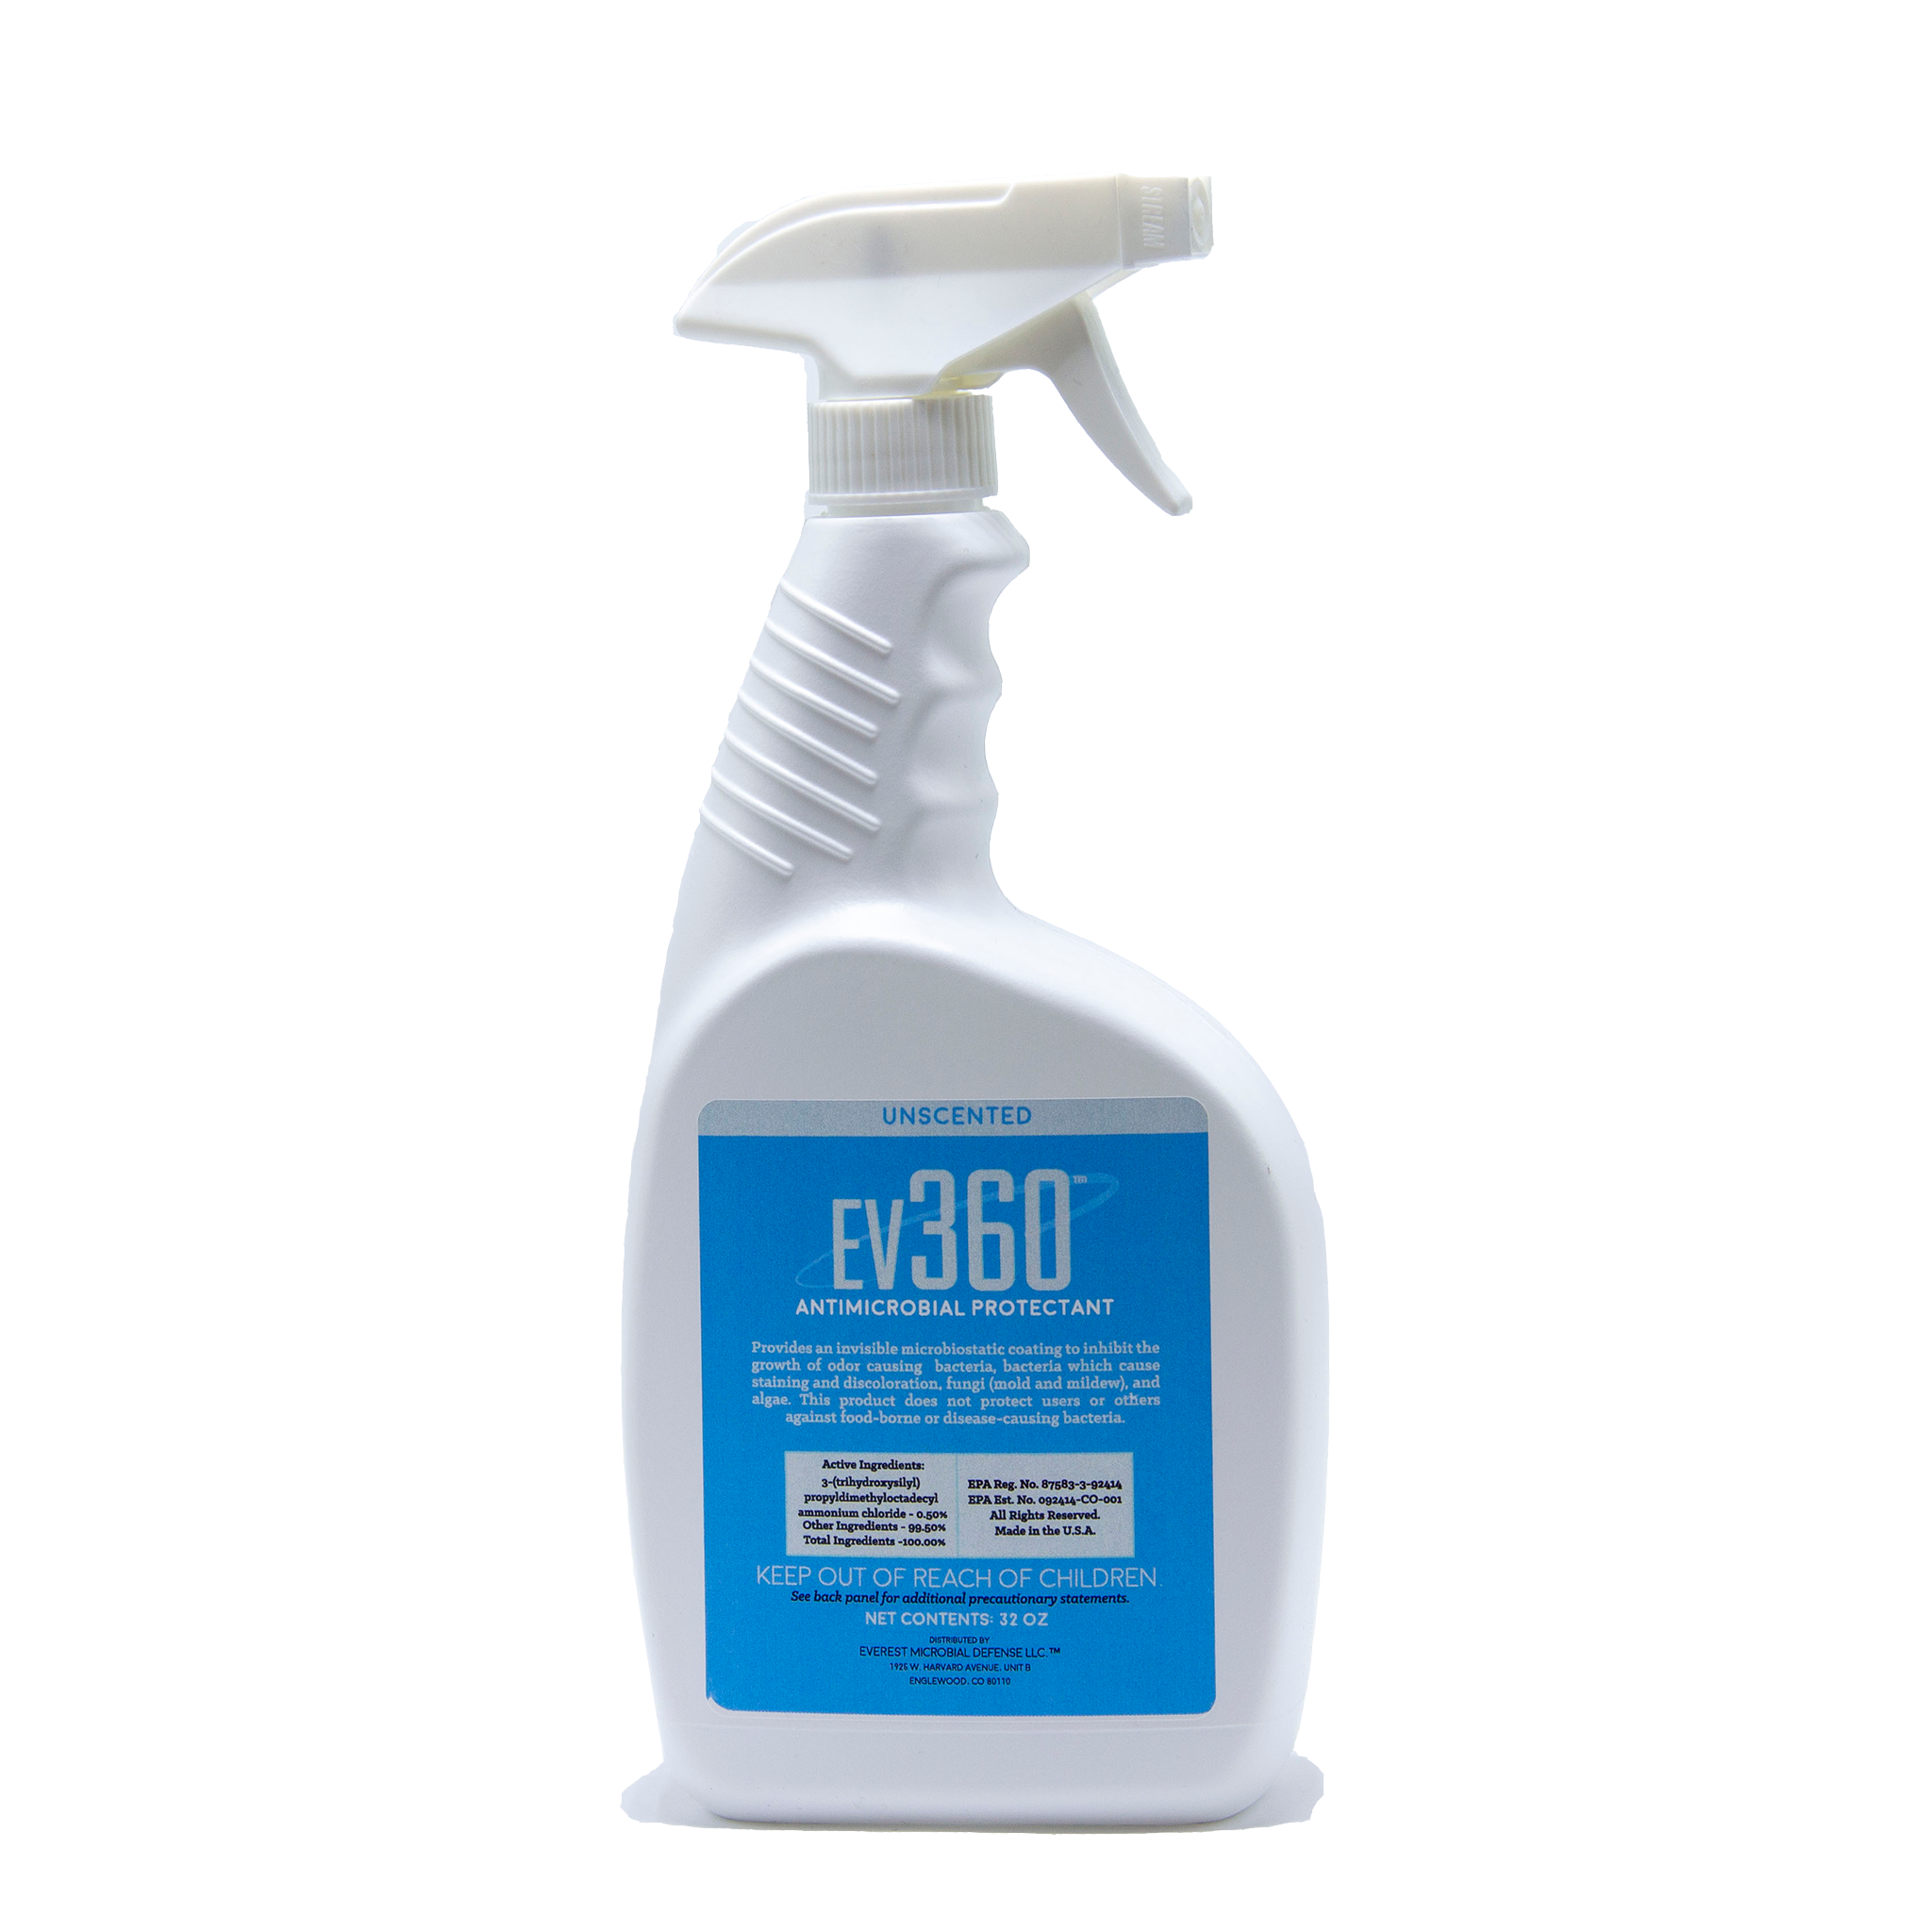 EV360 Antimicrobial Surface Protectant | 90 Day Mold Prevention 32oz Spray Bottle